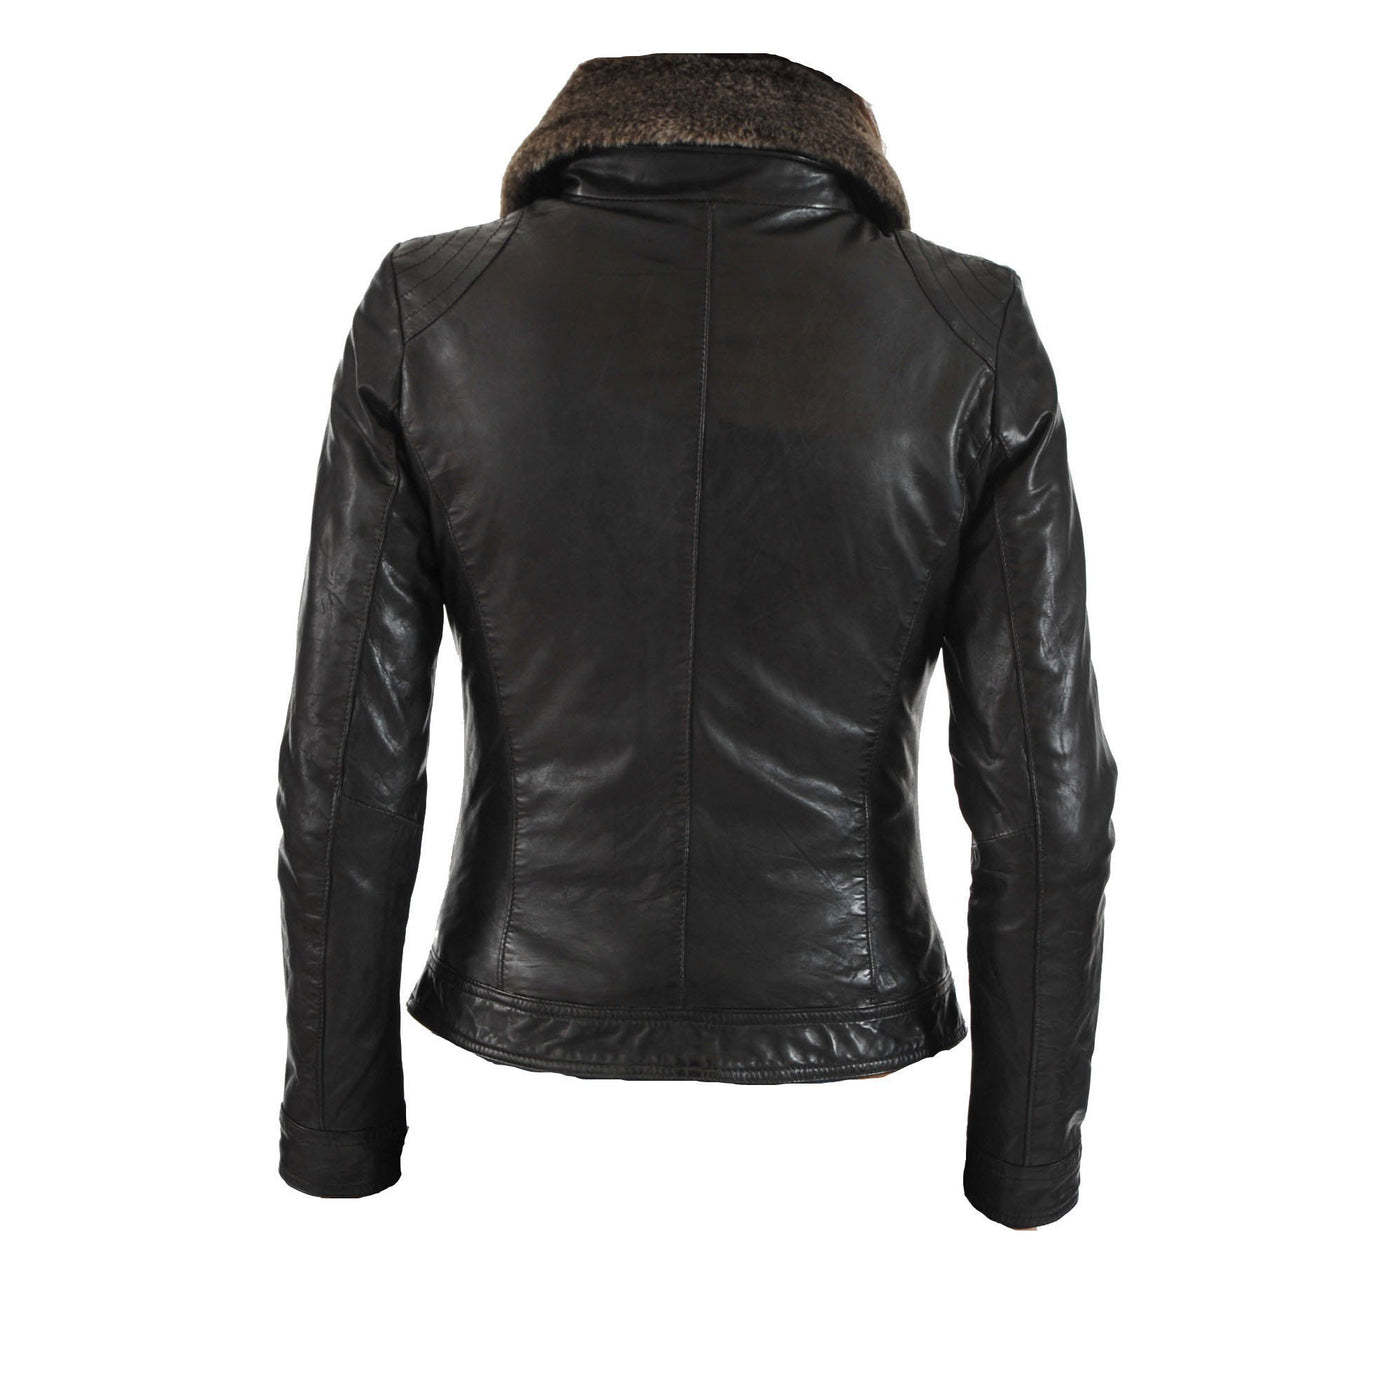 Women's black leather jacket with brown fur collar - Lusso Leather - 2